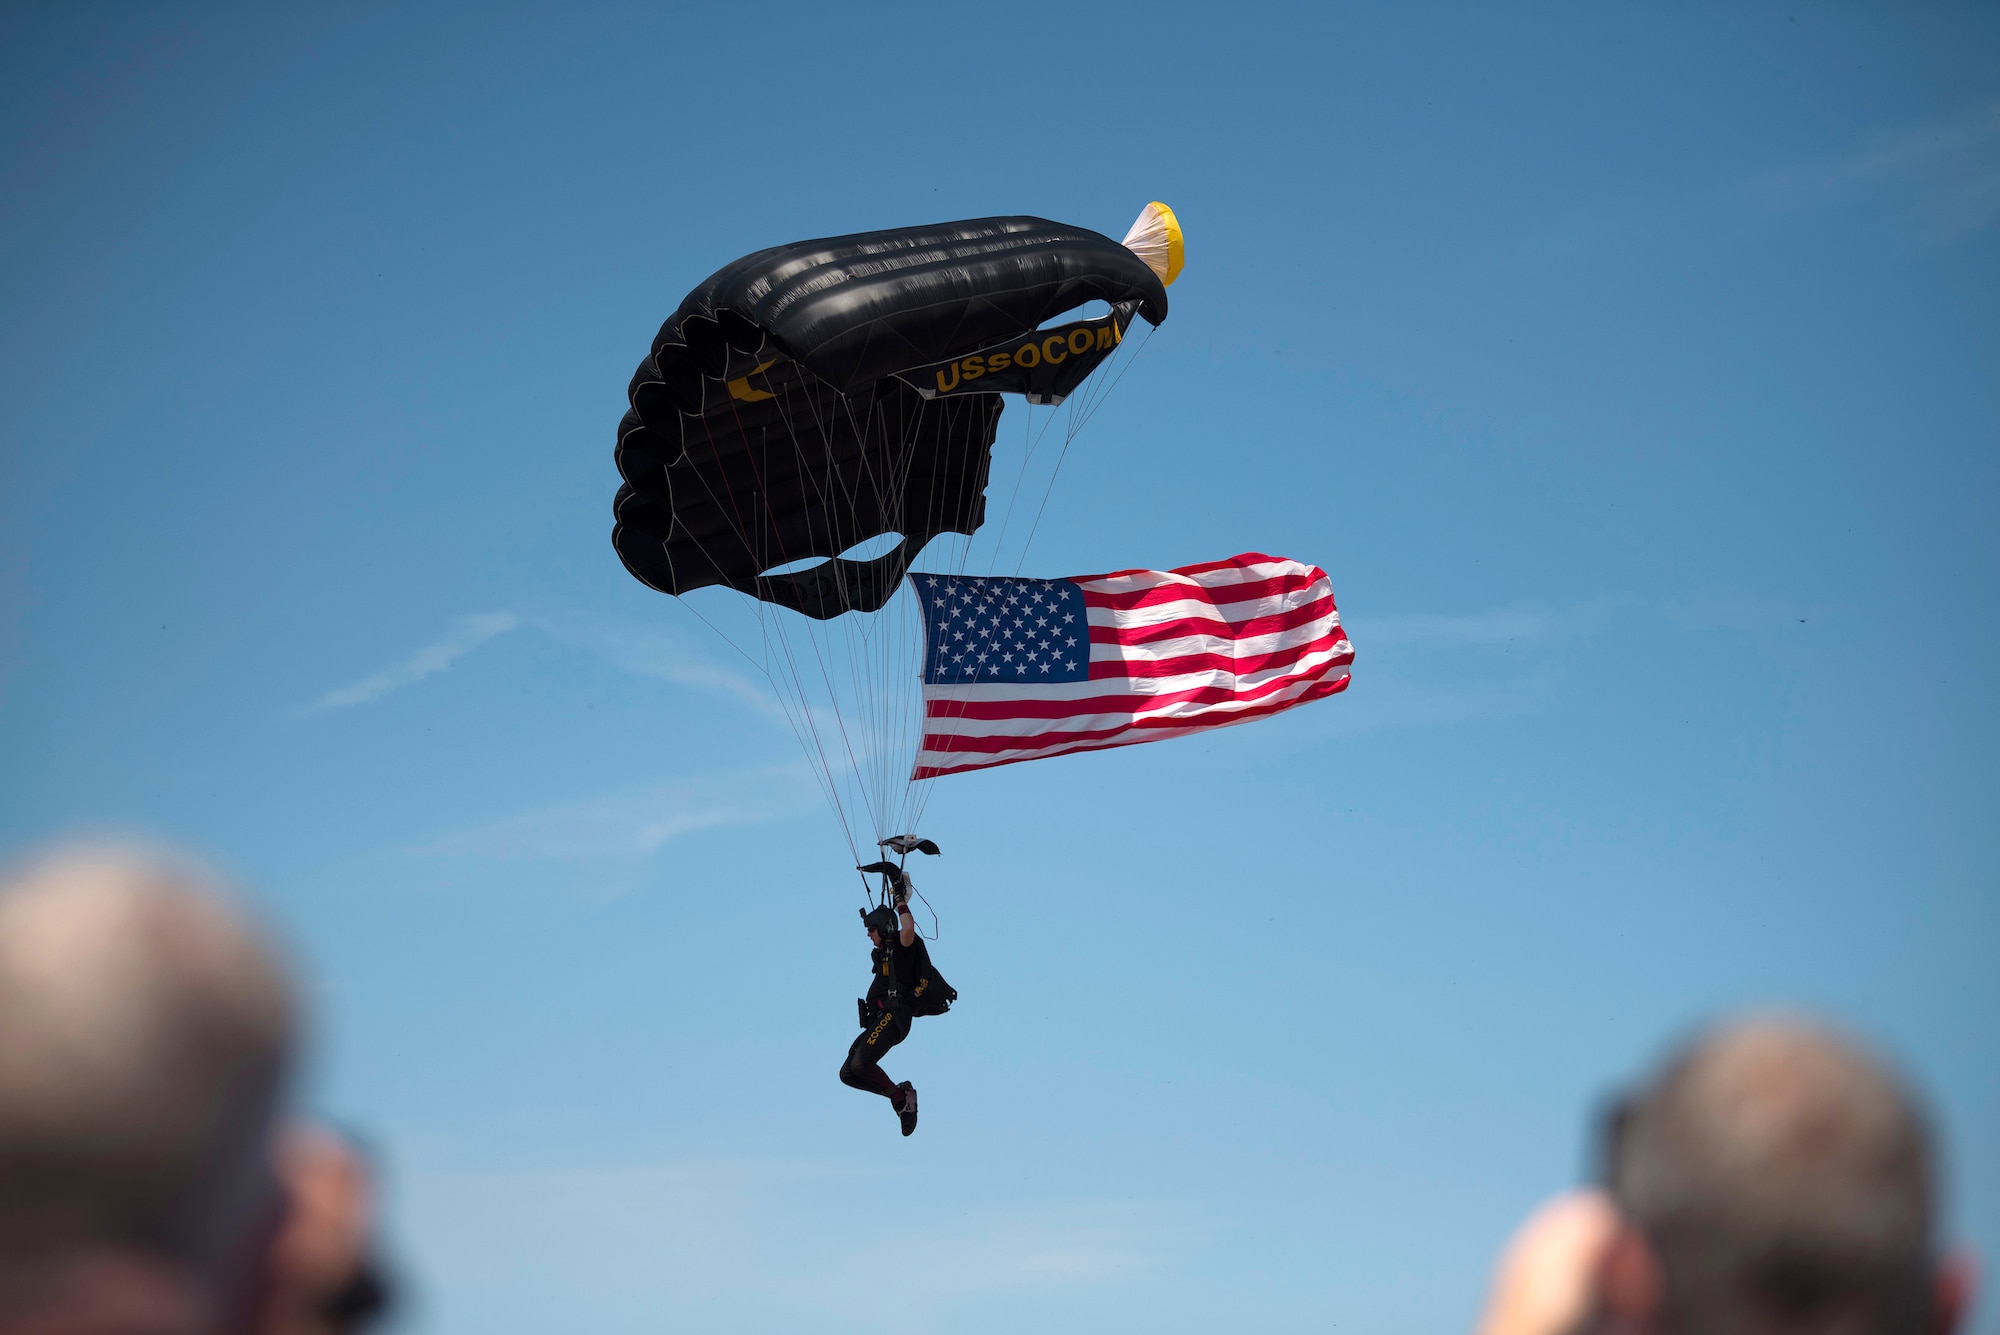 Chris Fucci, of the Para-Commandos, parachutes in on the flightline during Tampa Bay AirFest 2018 at MacDill Air Force Base, Fla., May 11, 2018. The Para-Commandos are U.S. Special Operations Command's premier aerial parachute demonstration team.